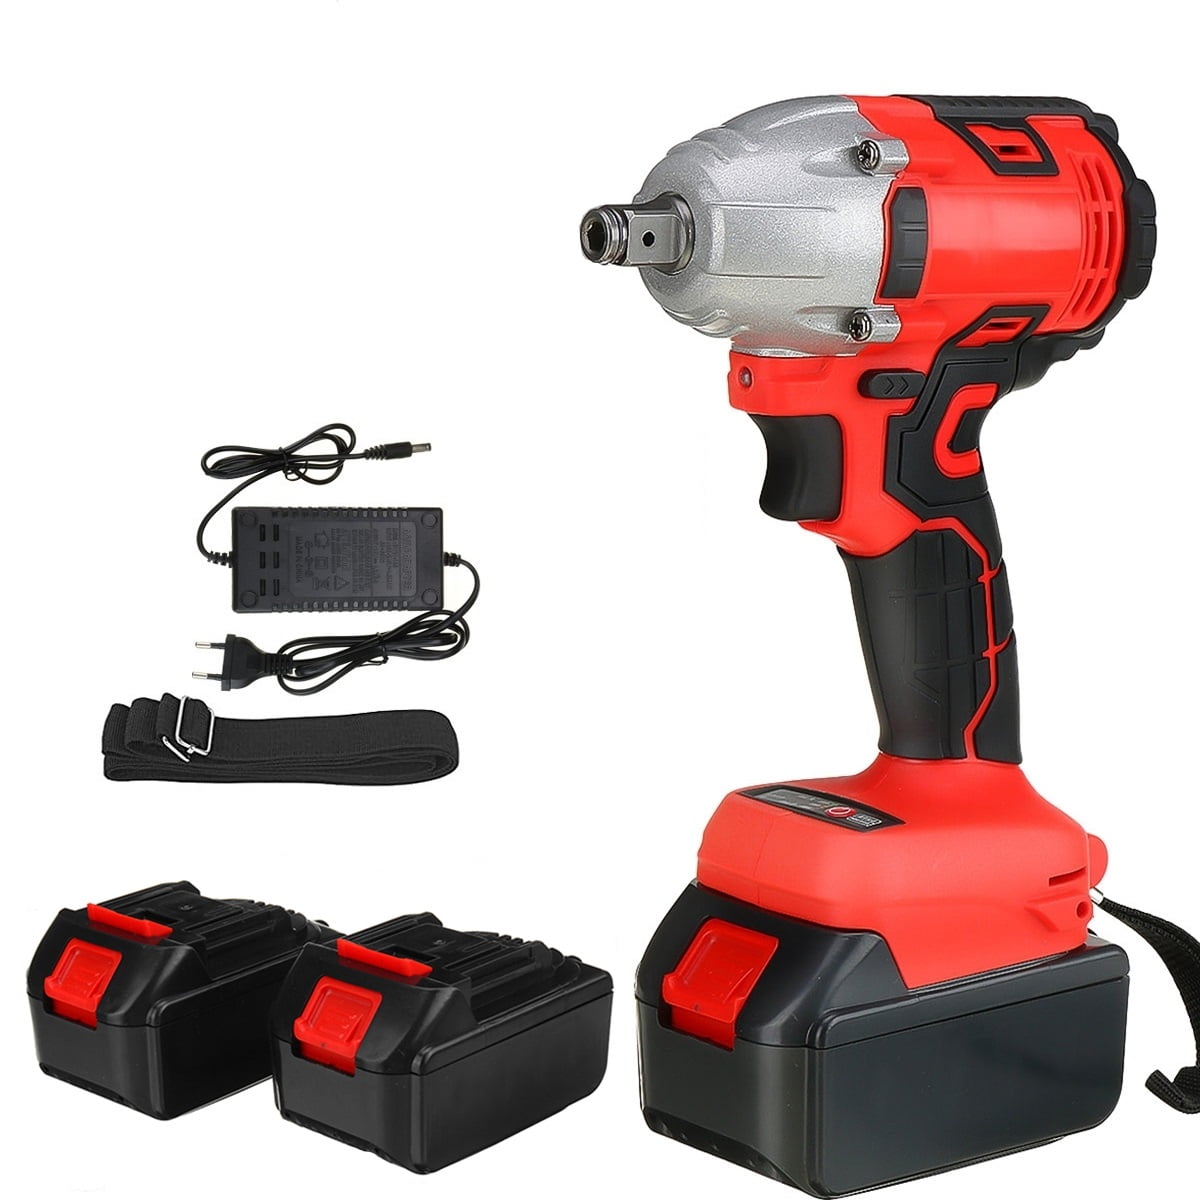 520Nm 1/2" Cordless Electric Impact Wrench Brushless Motor High Torque Drill 